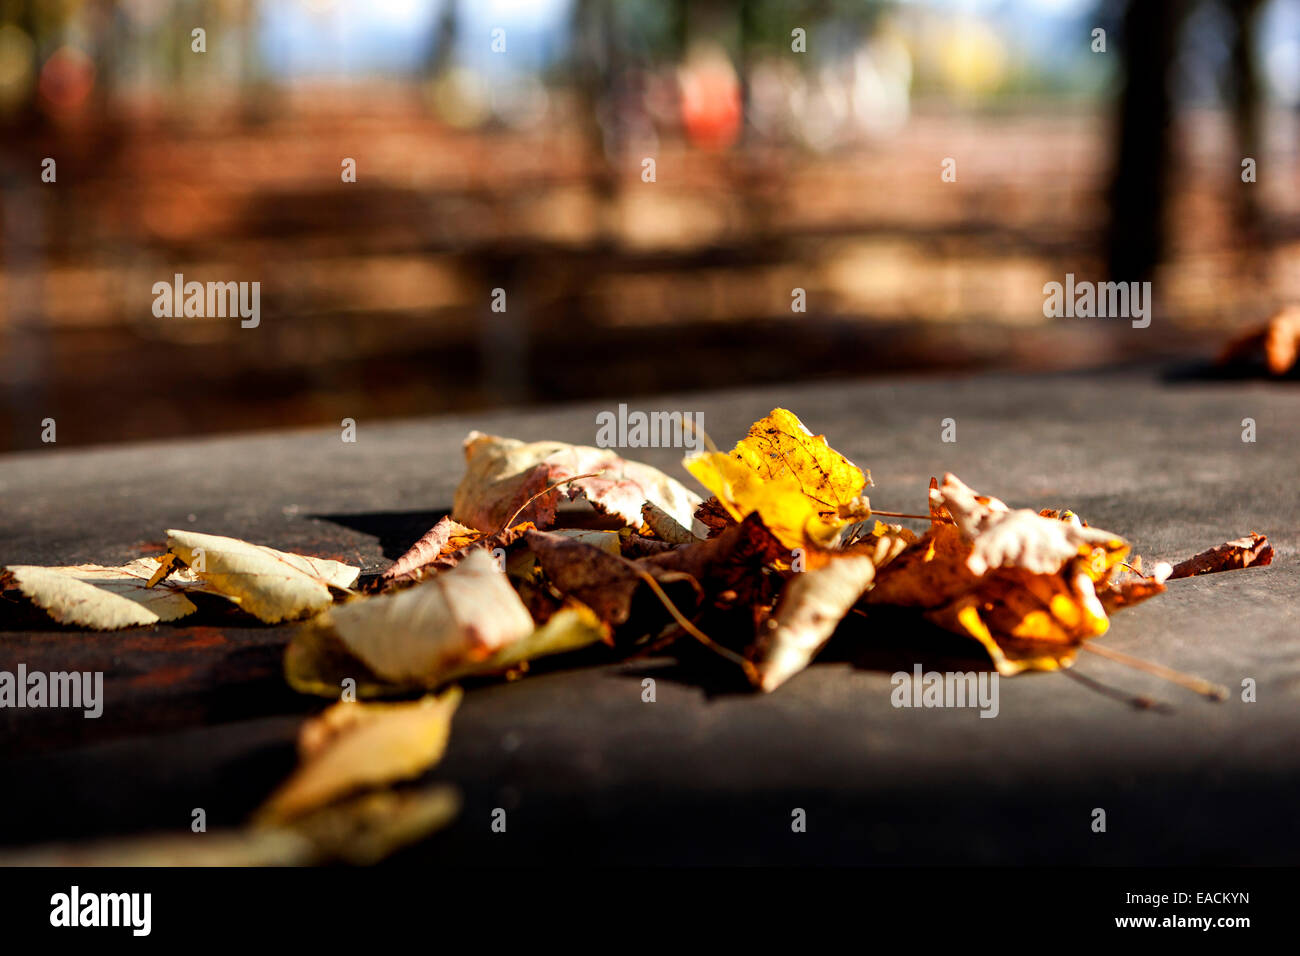 Fallen leaves on the table in autumn park Stock Photo